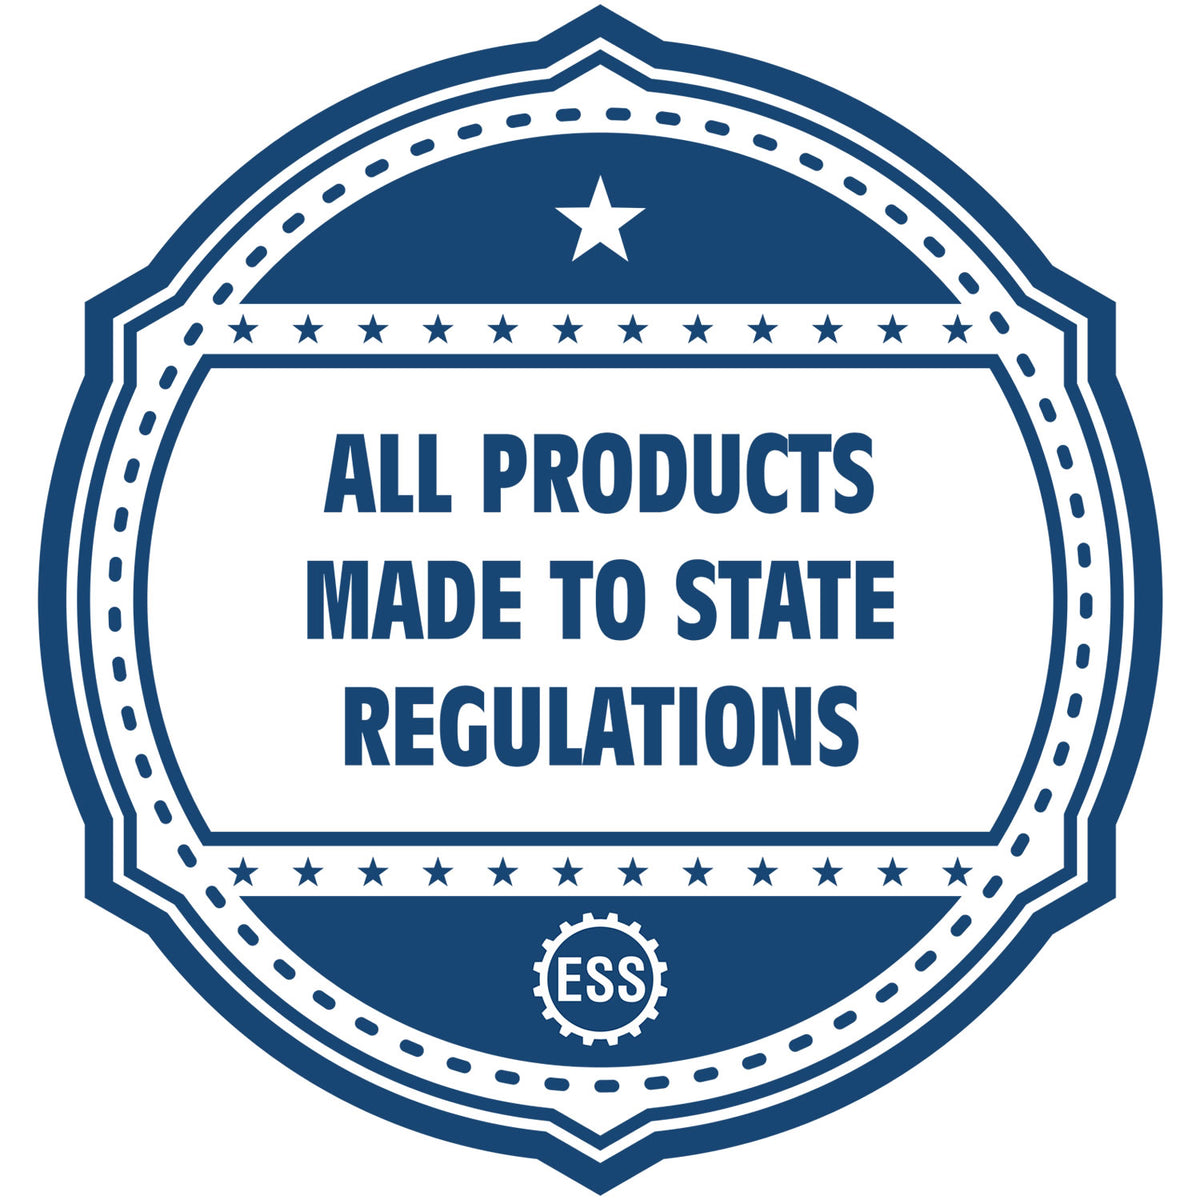 An icon or badge element for the Kentucky Desk Architect Embossing Seal showing that this product is made in compliance with state regulations.